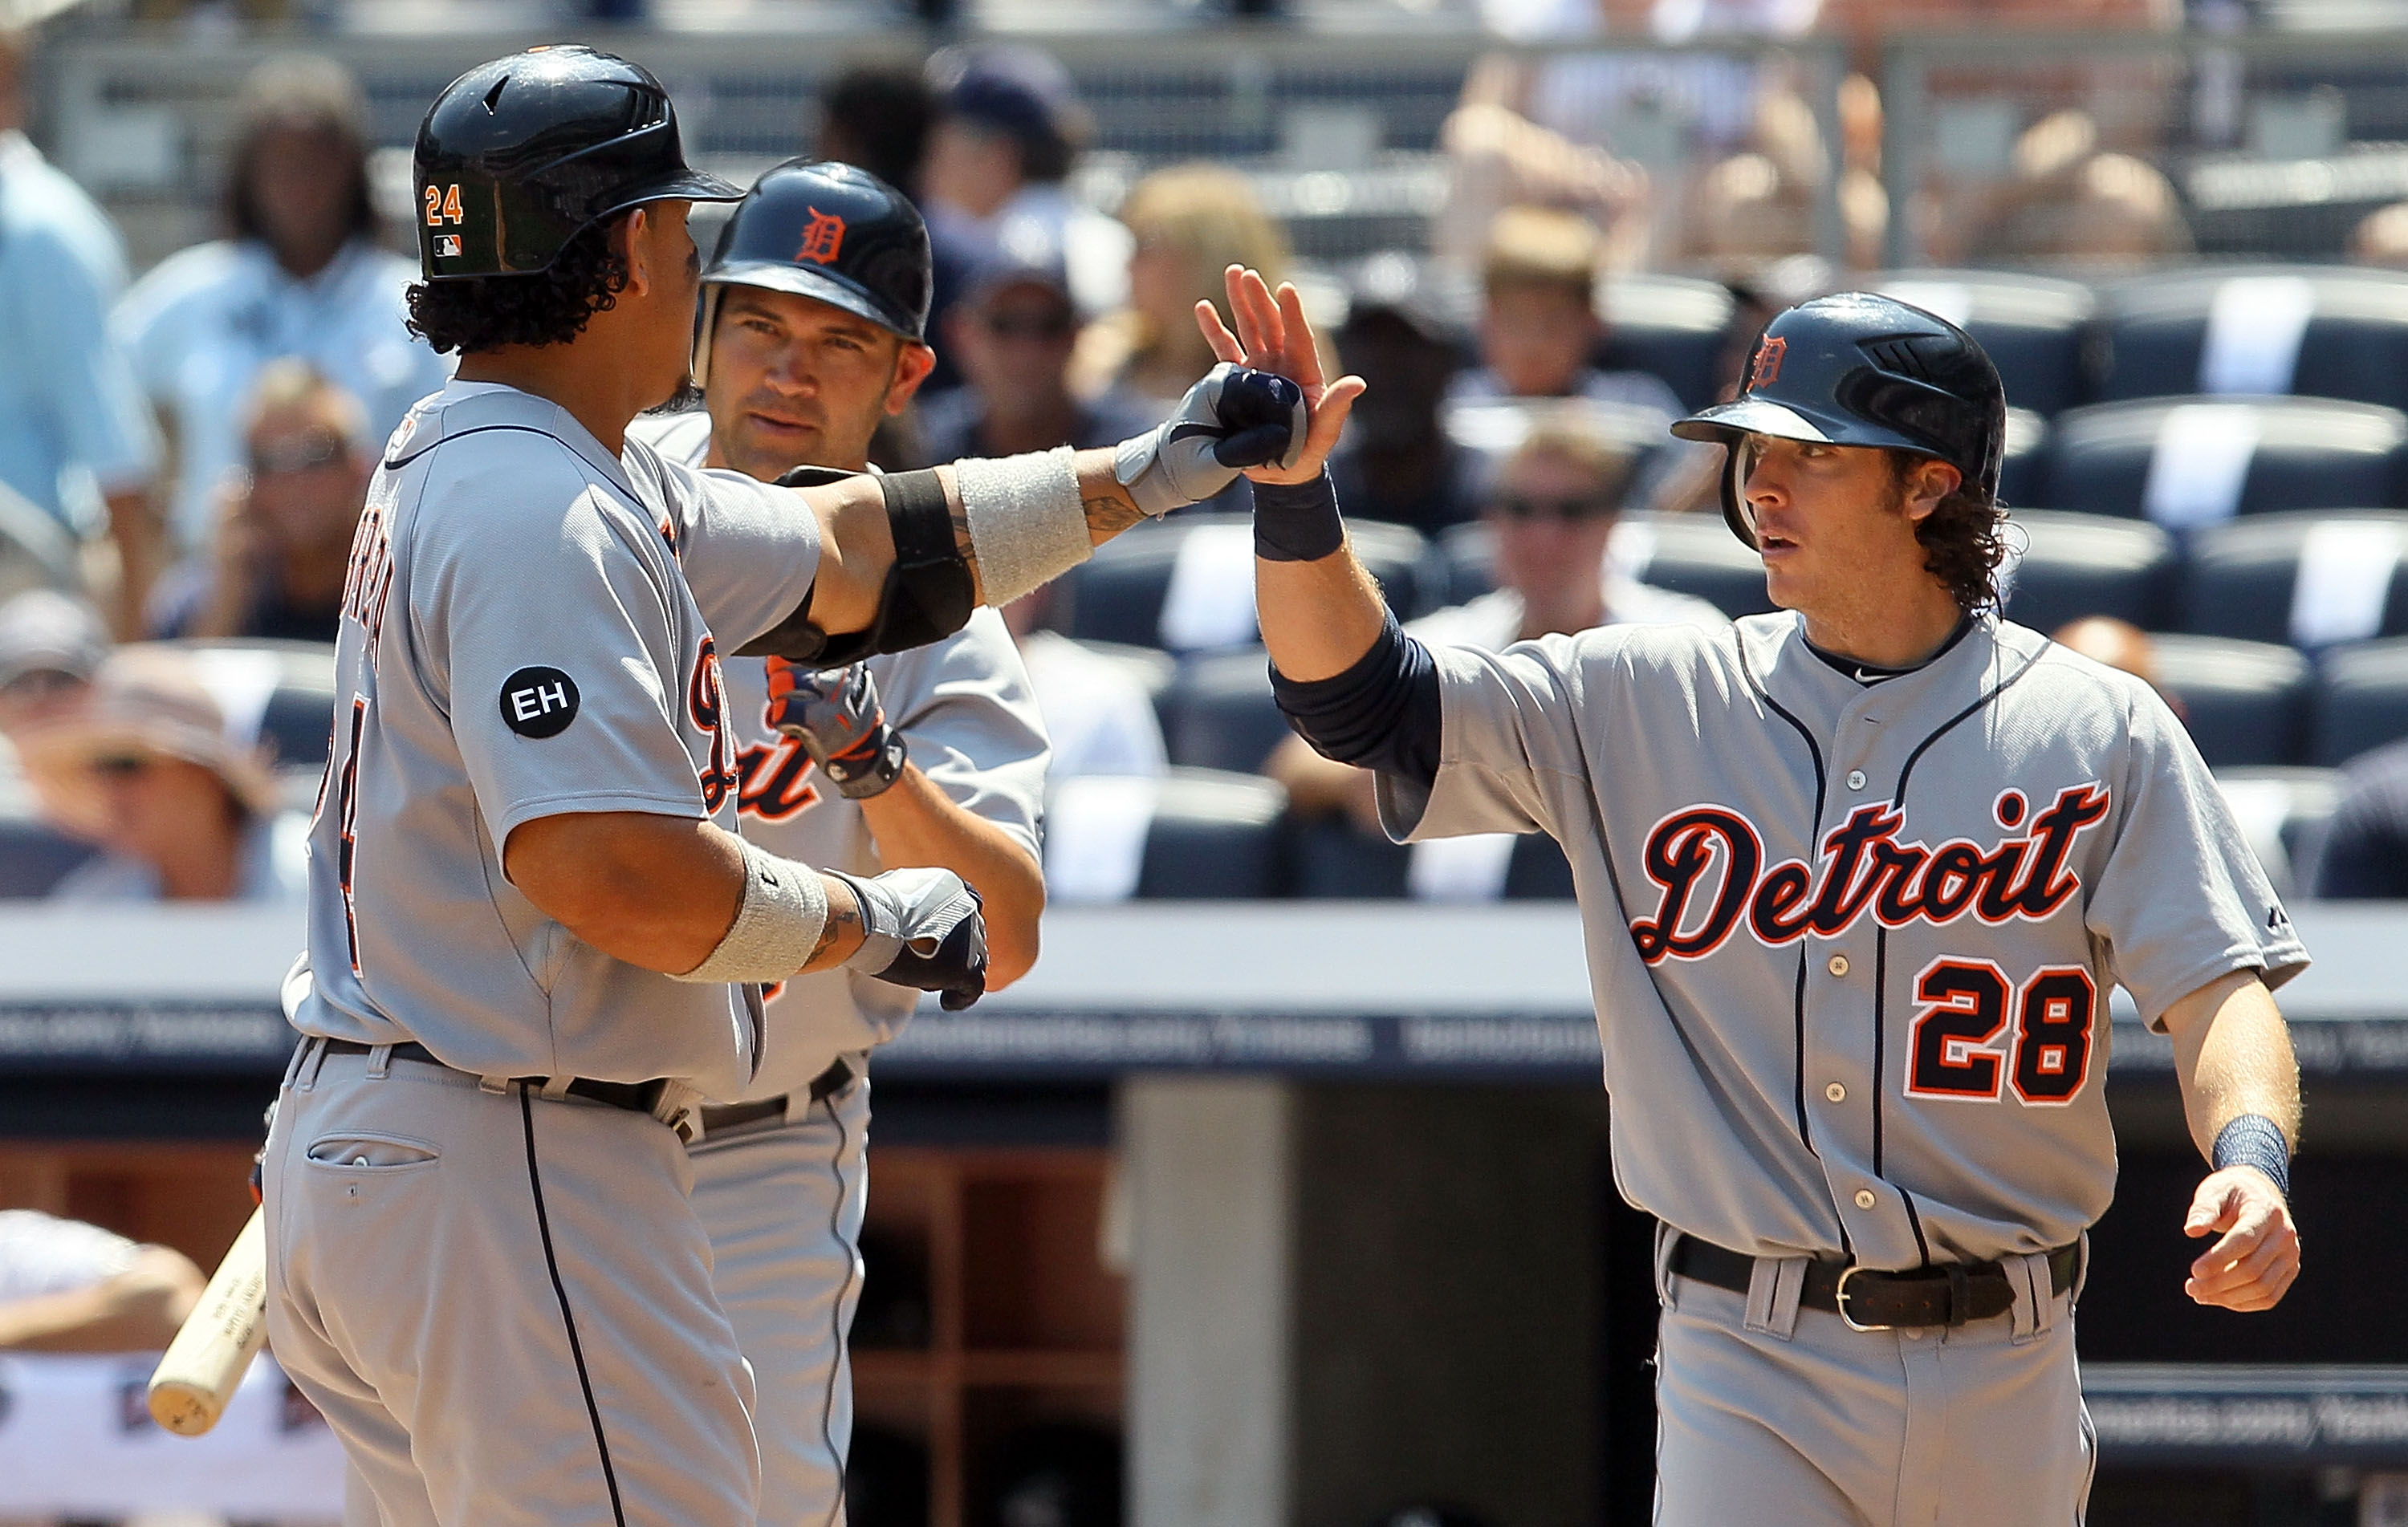 NEW YORK - AUGUST 19:  Miguel Cabrera #24 of the Detroit Tigers celebrates his first inning two run home run against the New York Yankees with teammates Johnny Damon #18 and Will Rhymes #28 on August 19, 2010 at Yankee Stadium in the Bronx borough of New